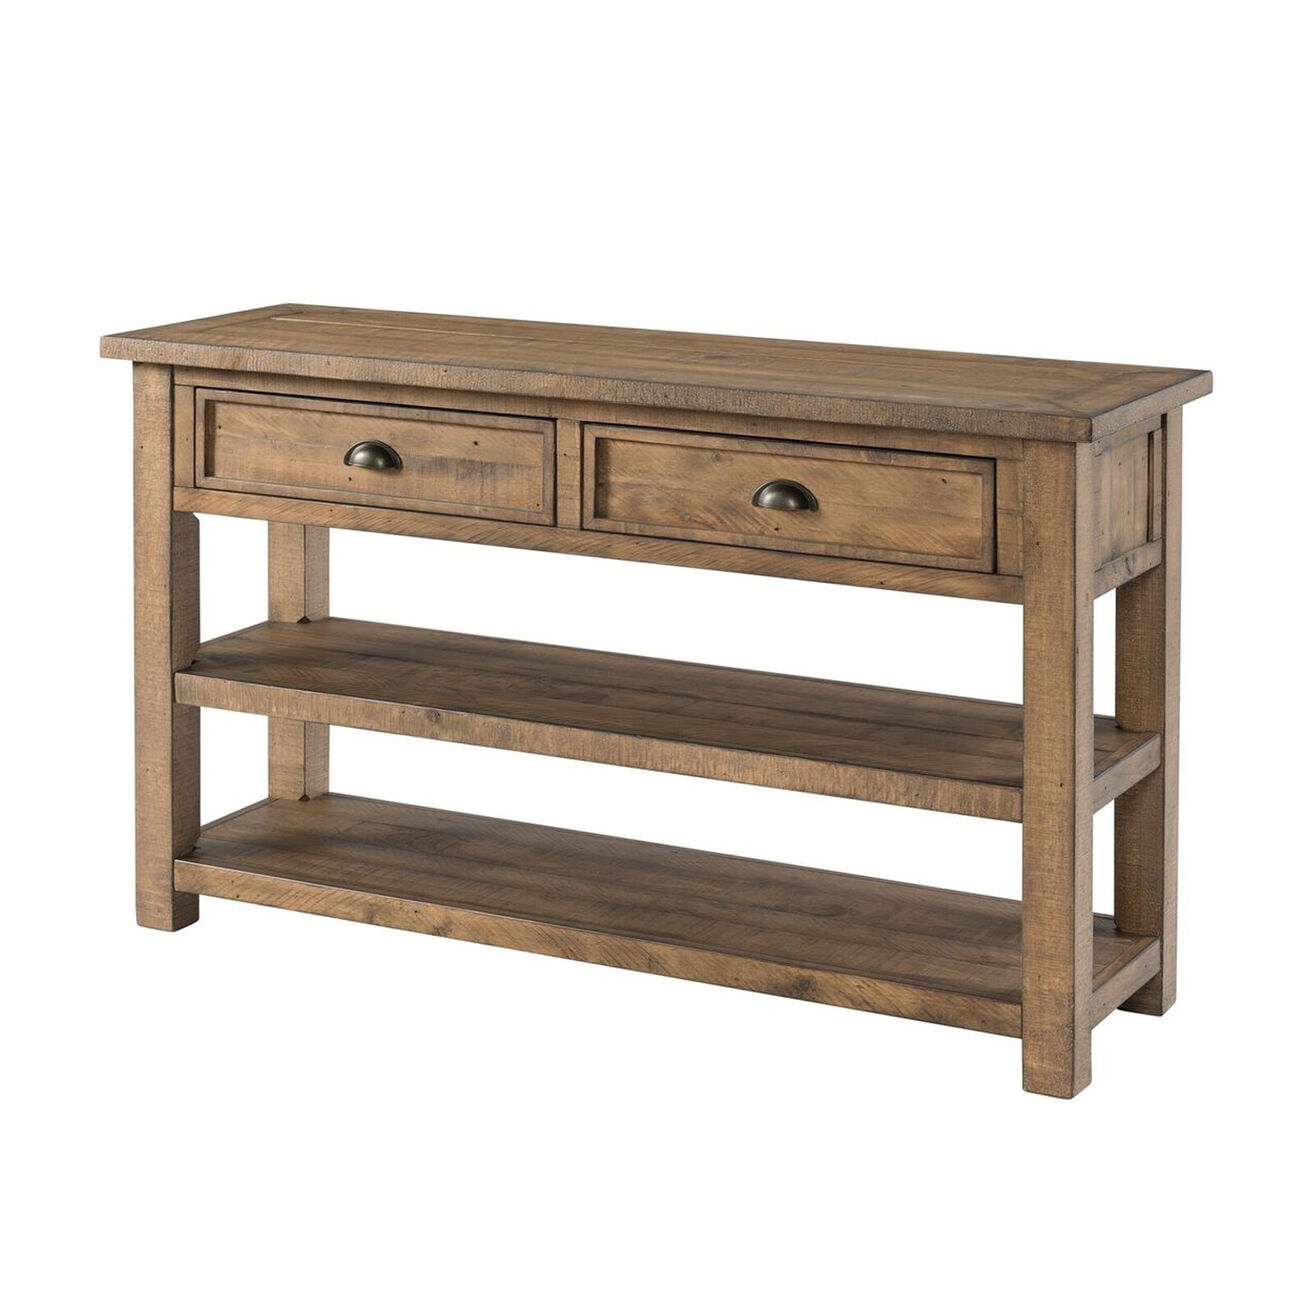 Coastal Style Rectangular Wooden Console Table with 2 Drawers, Brown